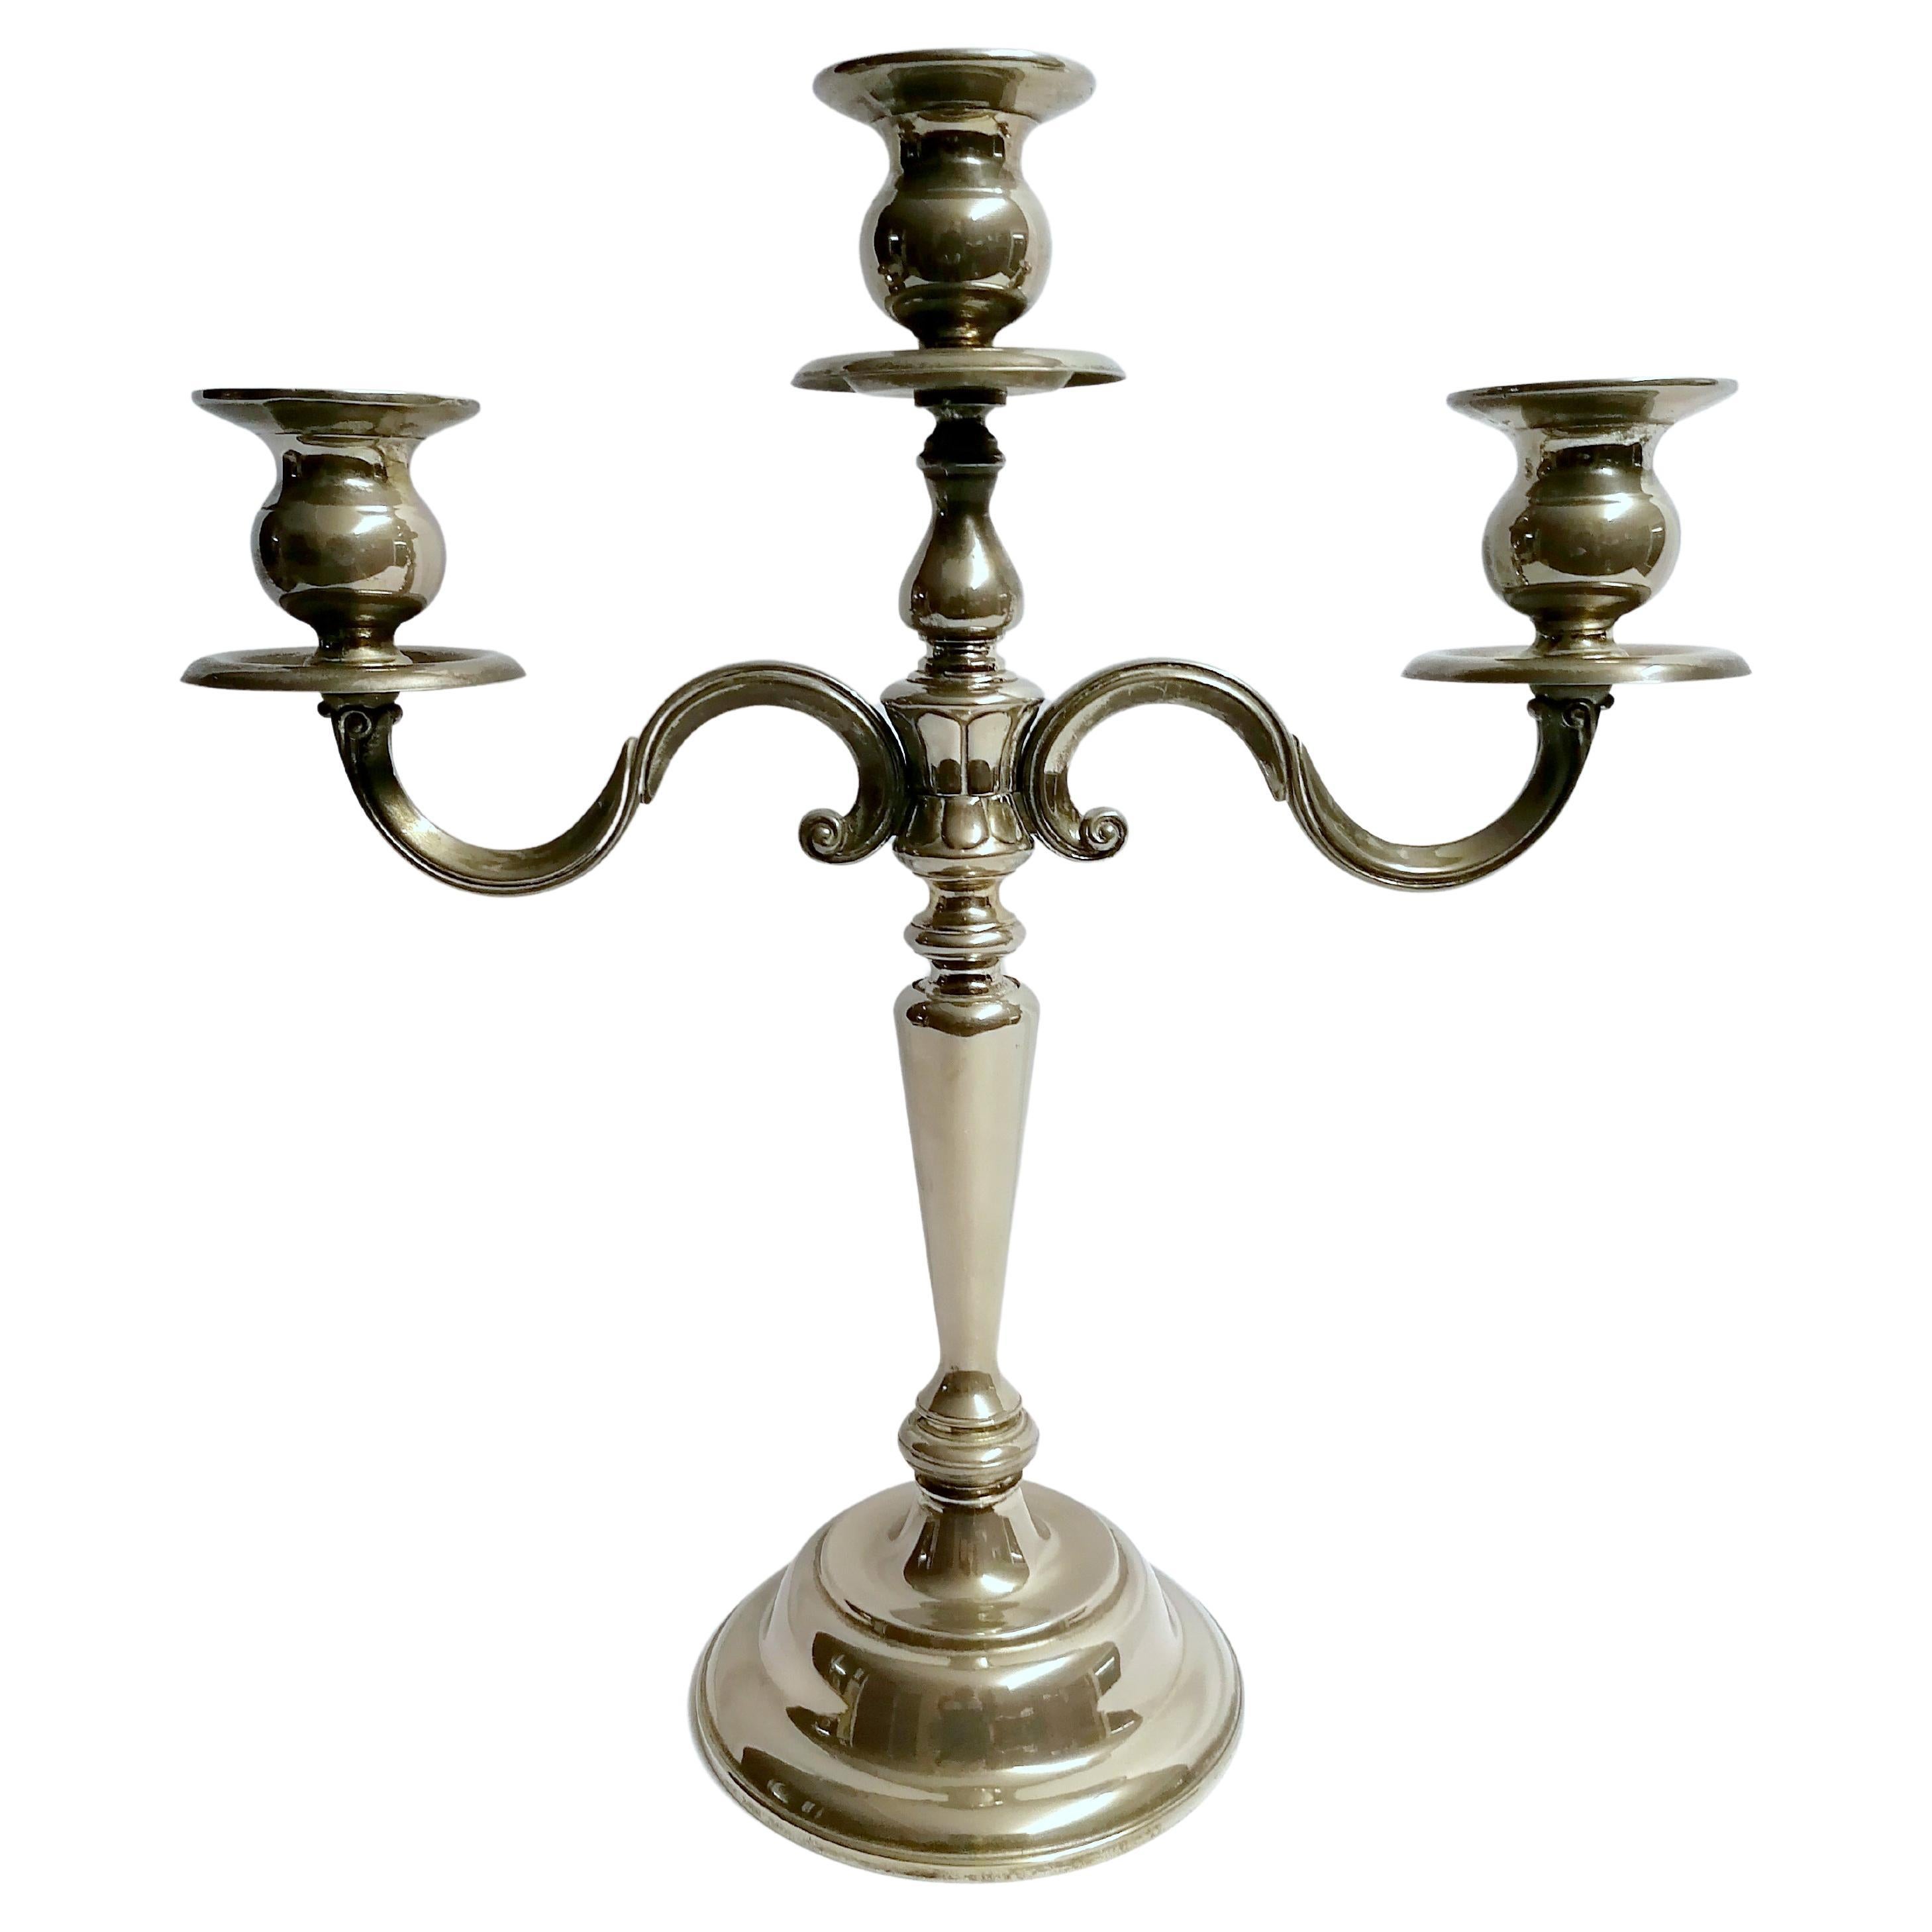 Candelabra Italian Silver Plated Candle Holder 3 Arms